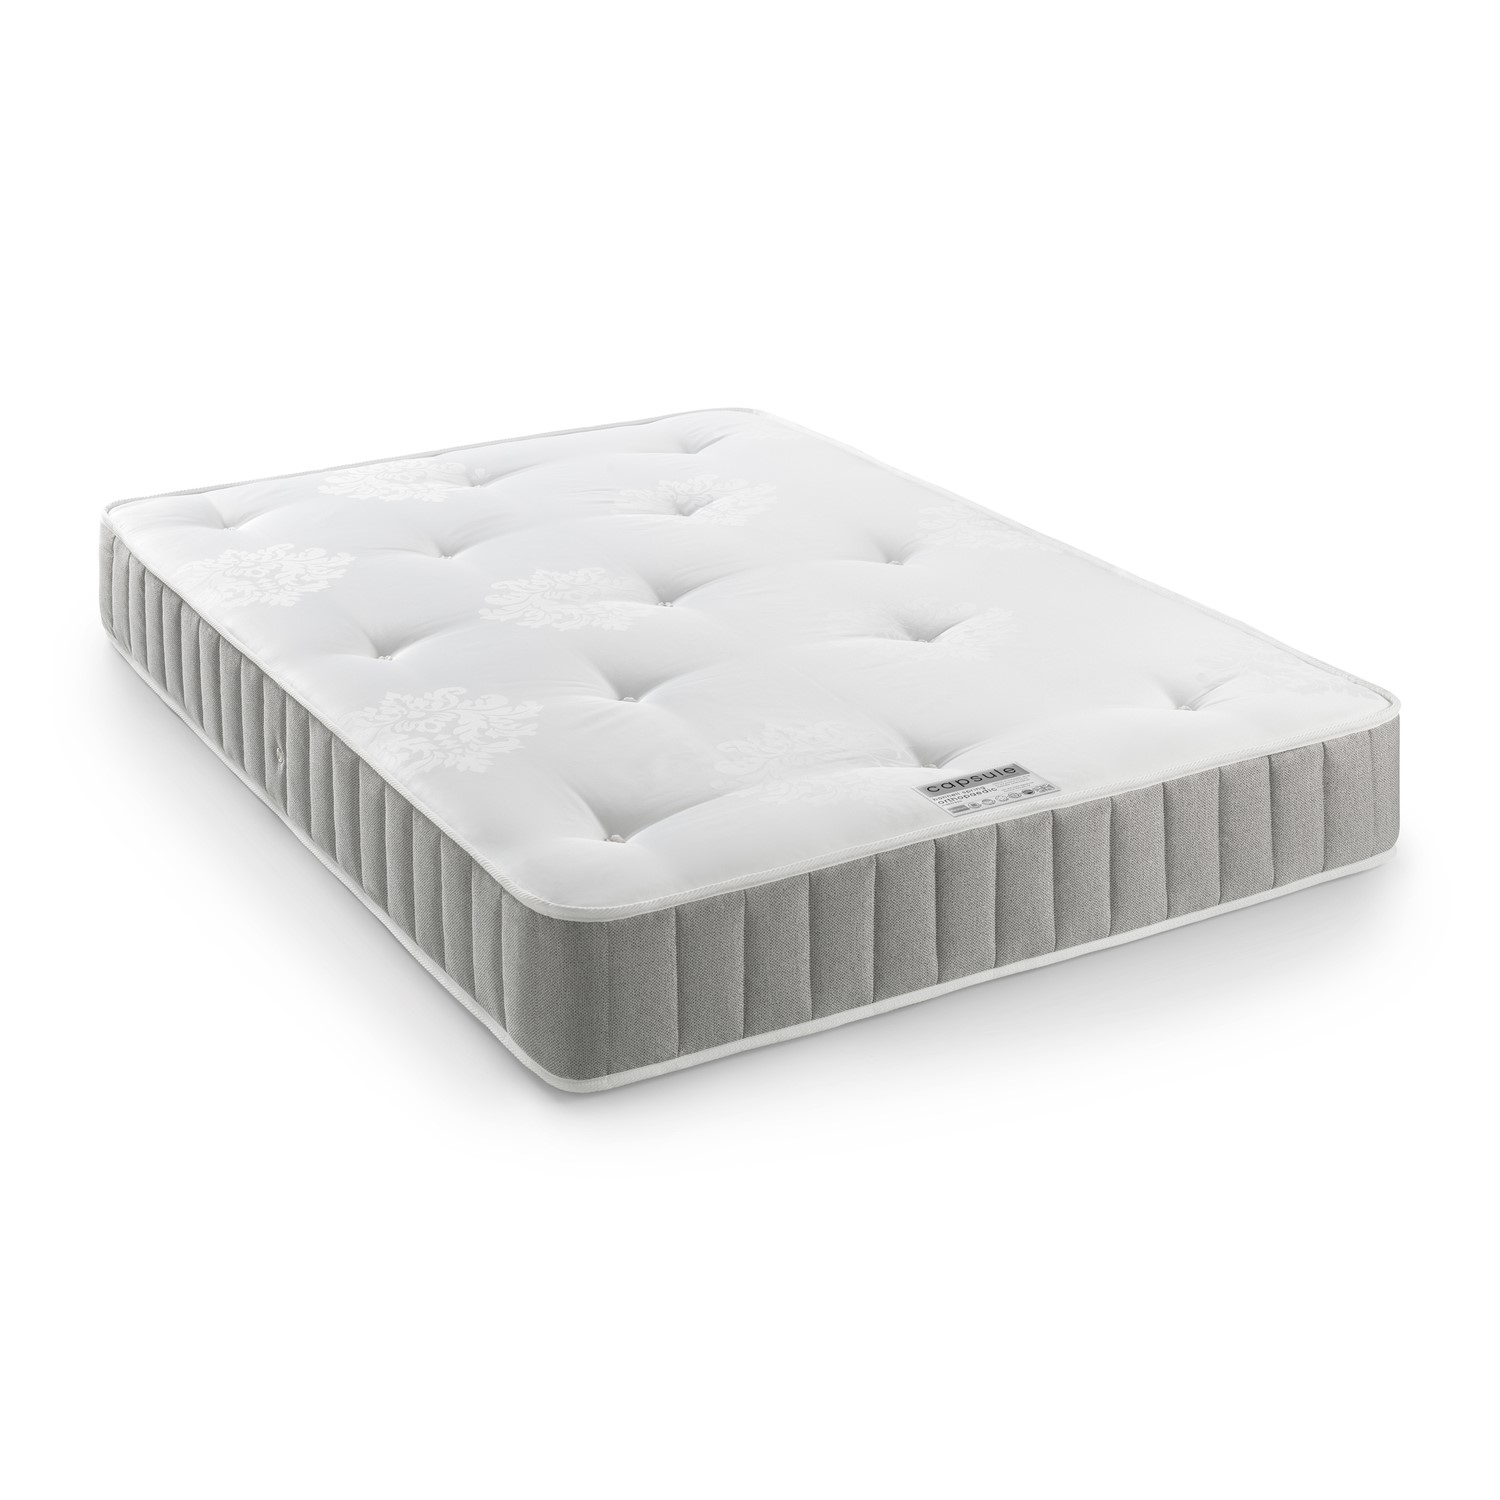 Read more about King size orthopaedic open coil spring padded top mattress capsule julian bowen